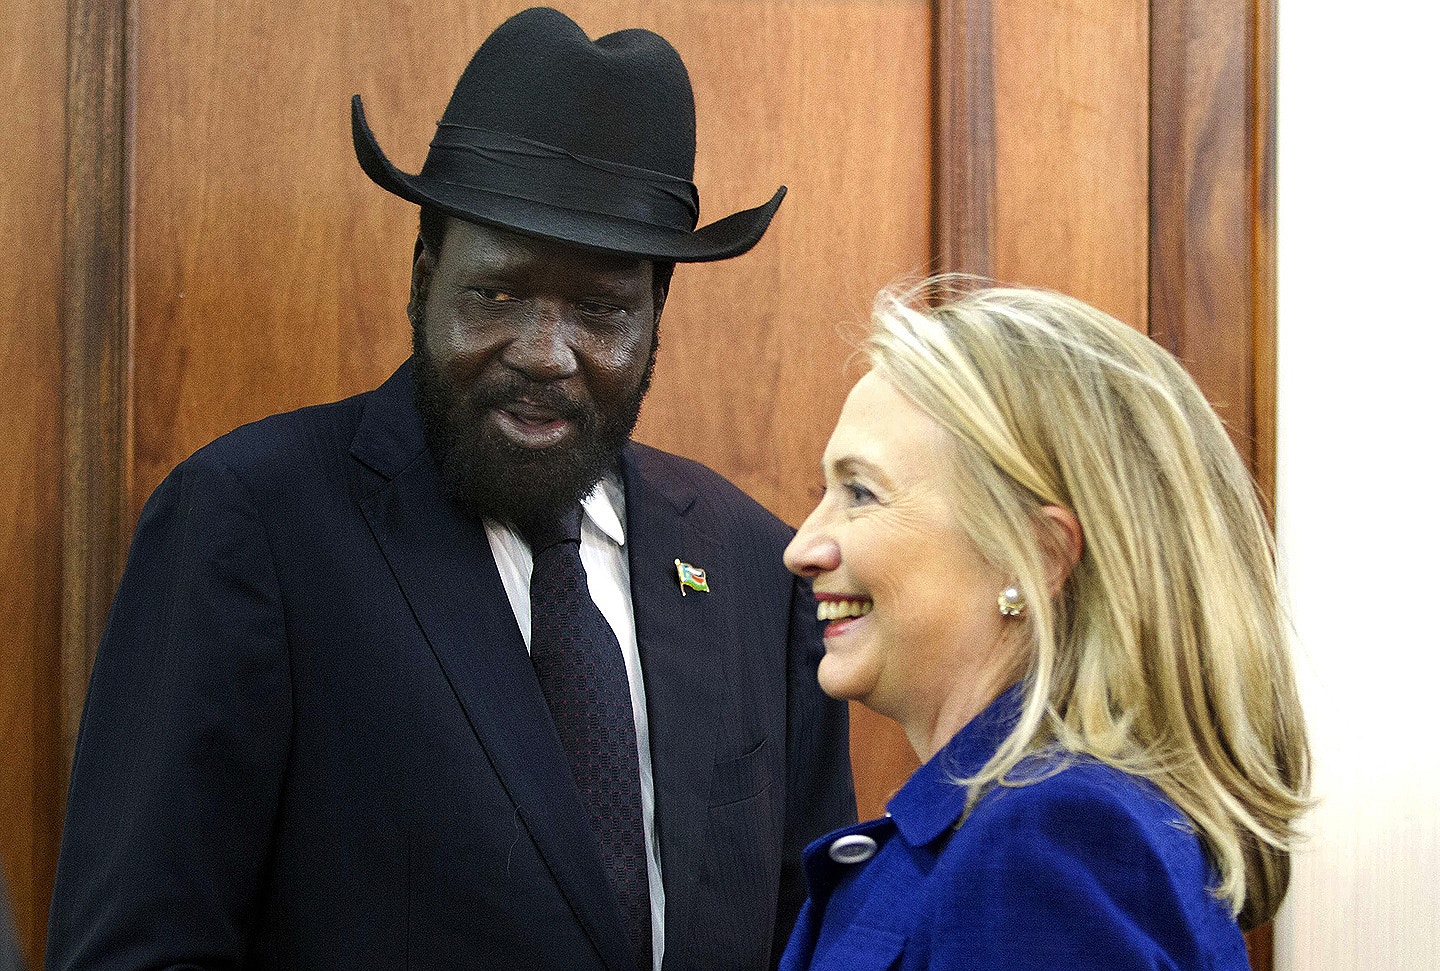 U.S. Secretary of State Hillary Clinton (R) meets with South Sudanese President Salva Kiir at the Presidential Office Building in Juba August 3, 2012. U.S. Secretary of State Clinton urged South Sudan and Sudan on Friday to end an oil dispute that has brought the neighbors to the brink of war, during the highest-level visit of a U.S. official to Juba since its independence a year ago.  REUTERS/Jacquelyn Martin/Pool (SOUTH SUDAN - Tags: POLITICS) (Newscom TagID: rtrlfive409924.jpg) [Photo via Newscom]